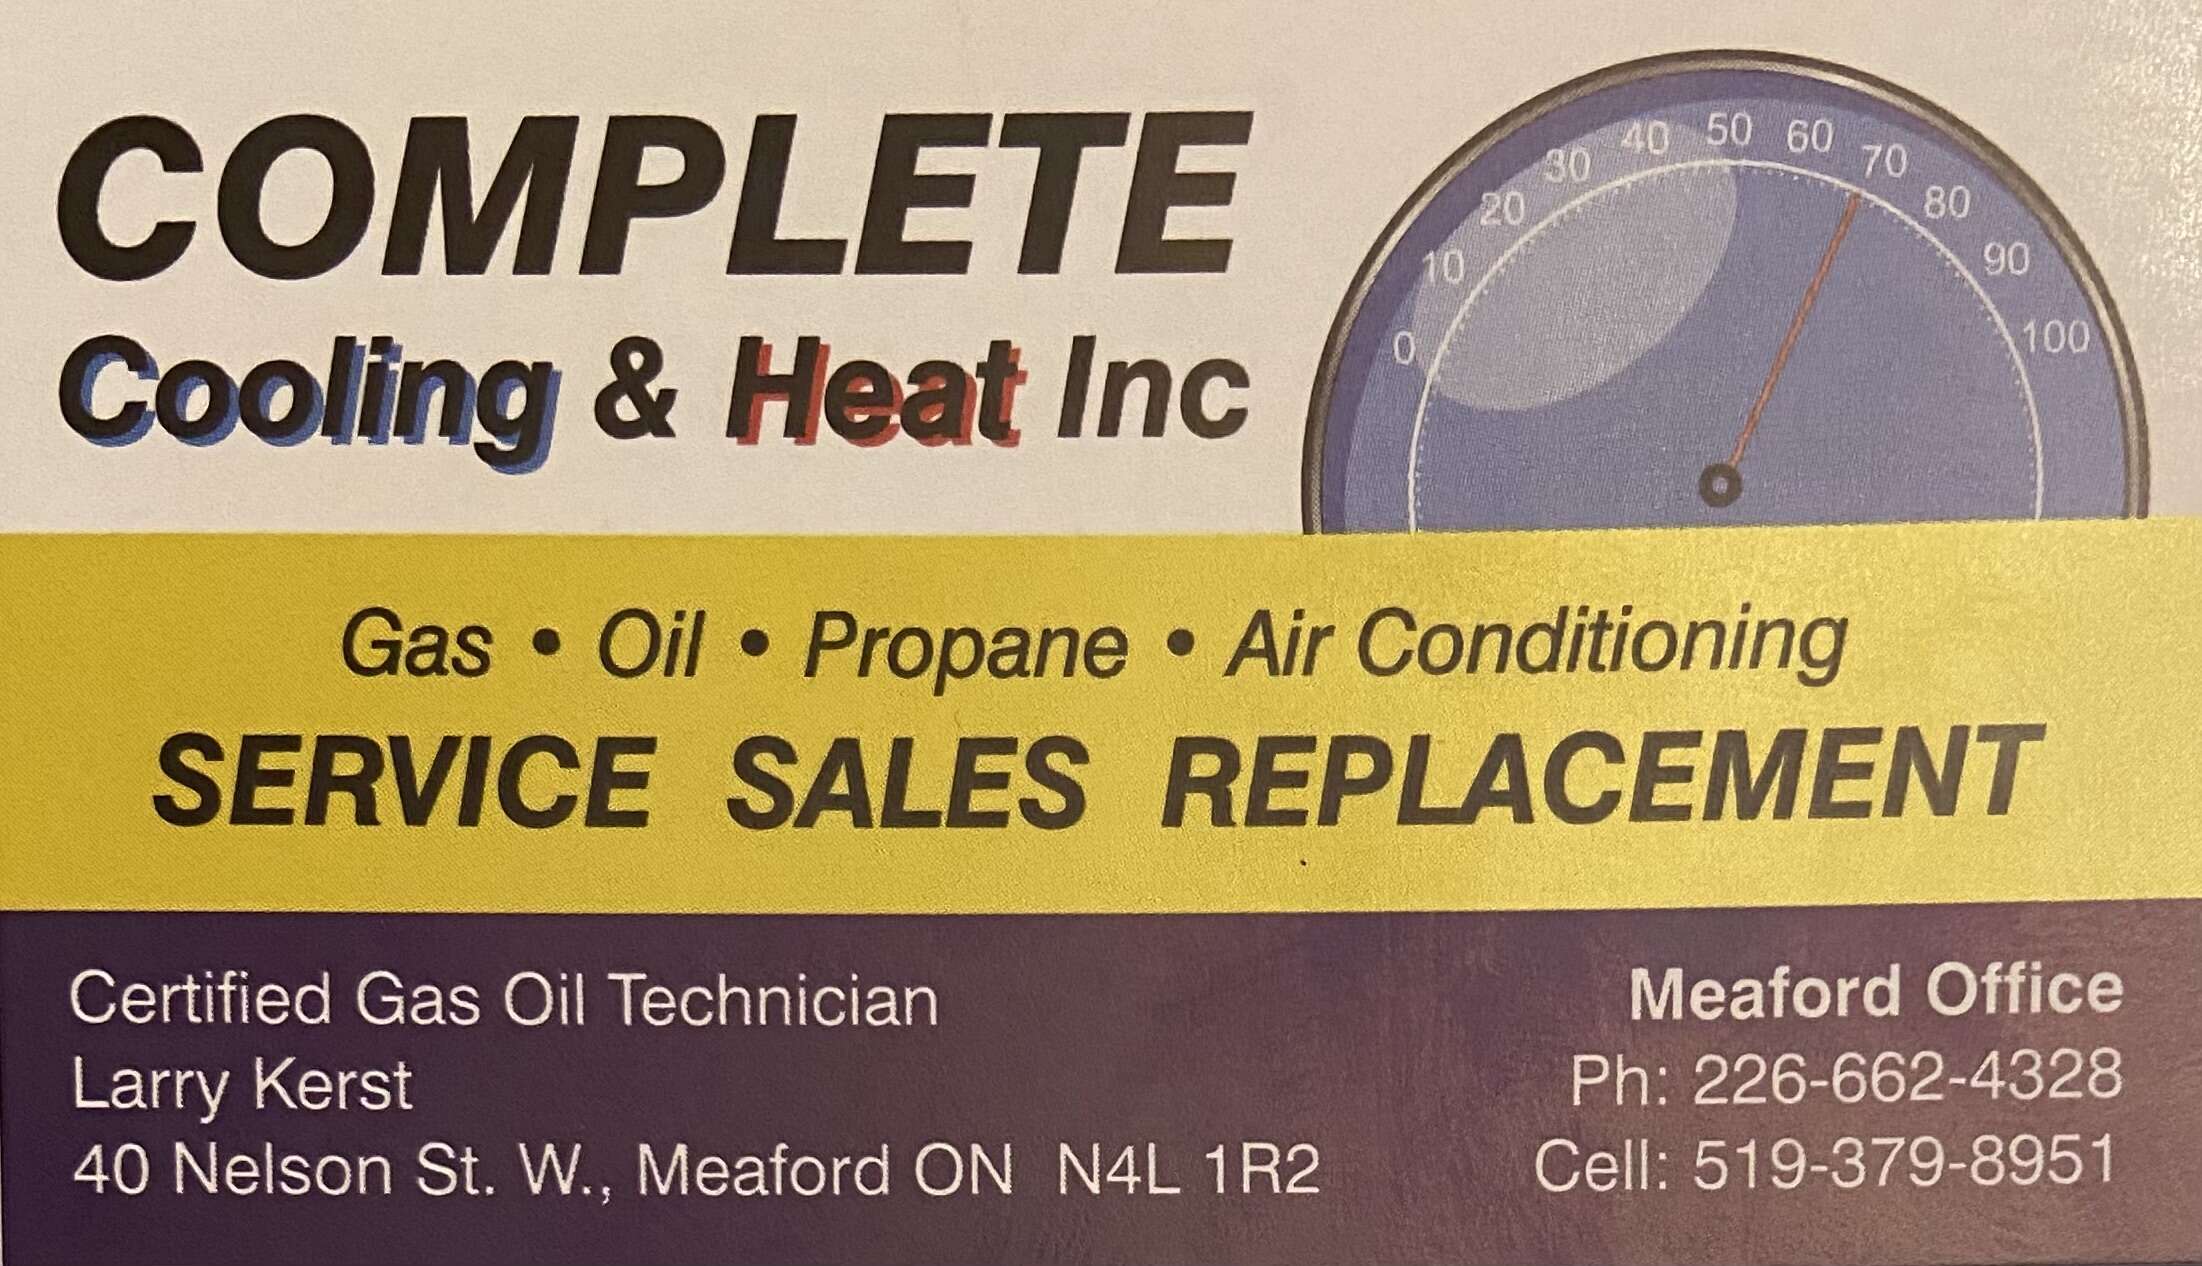 Complete Cooling & Heat Inc